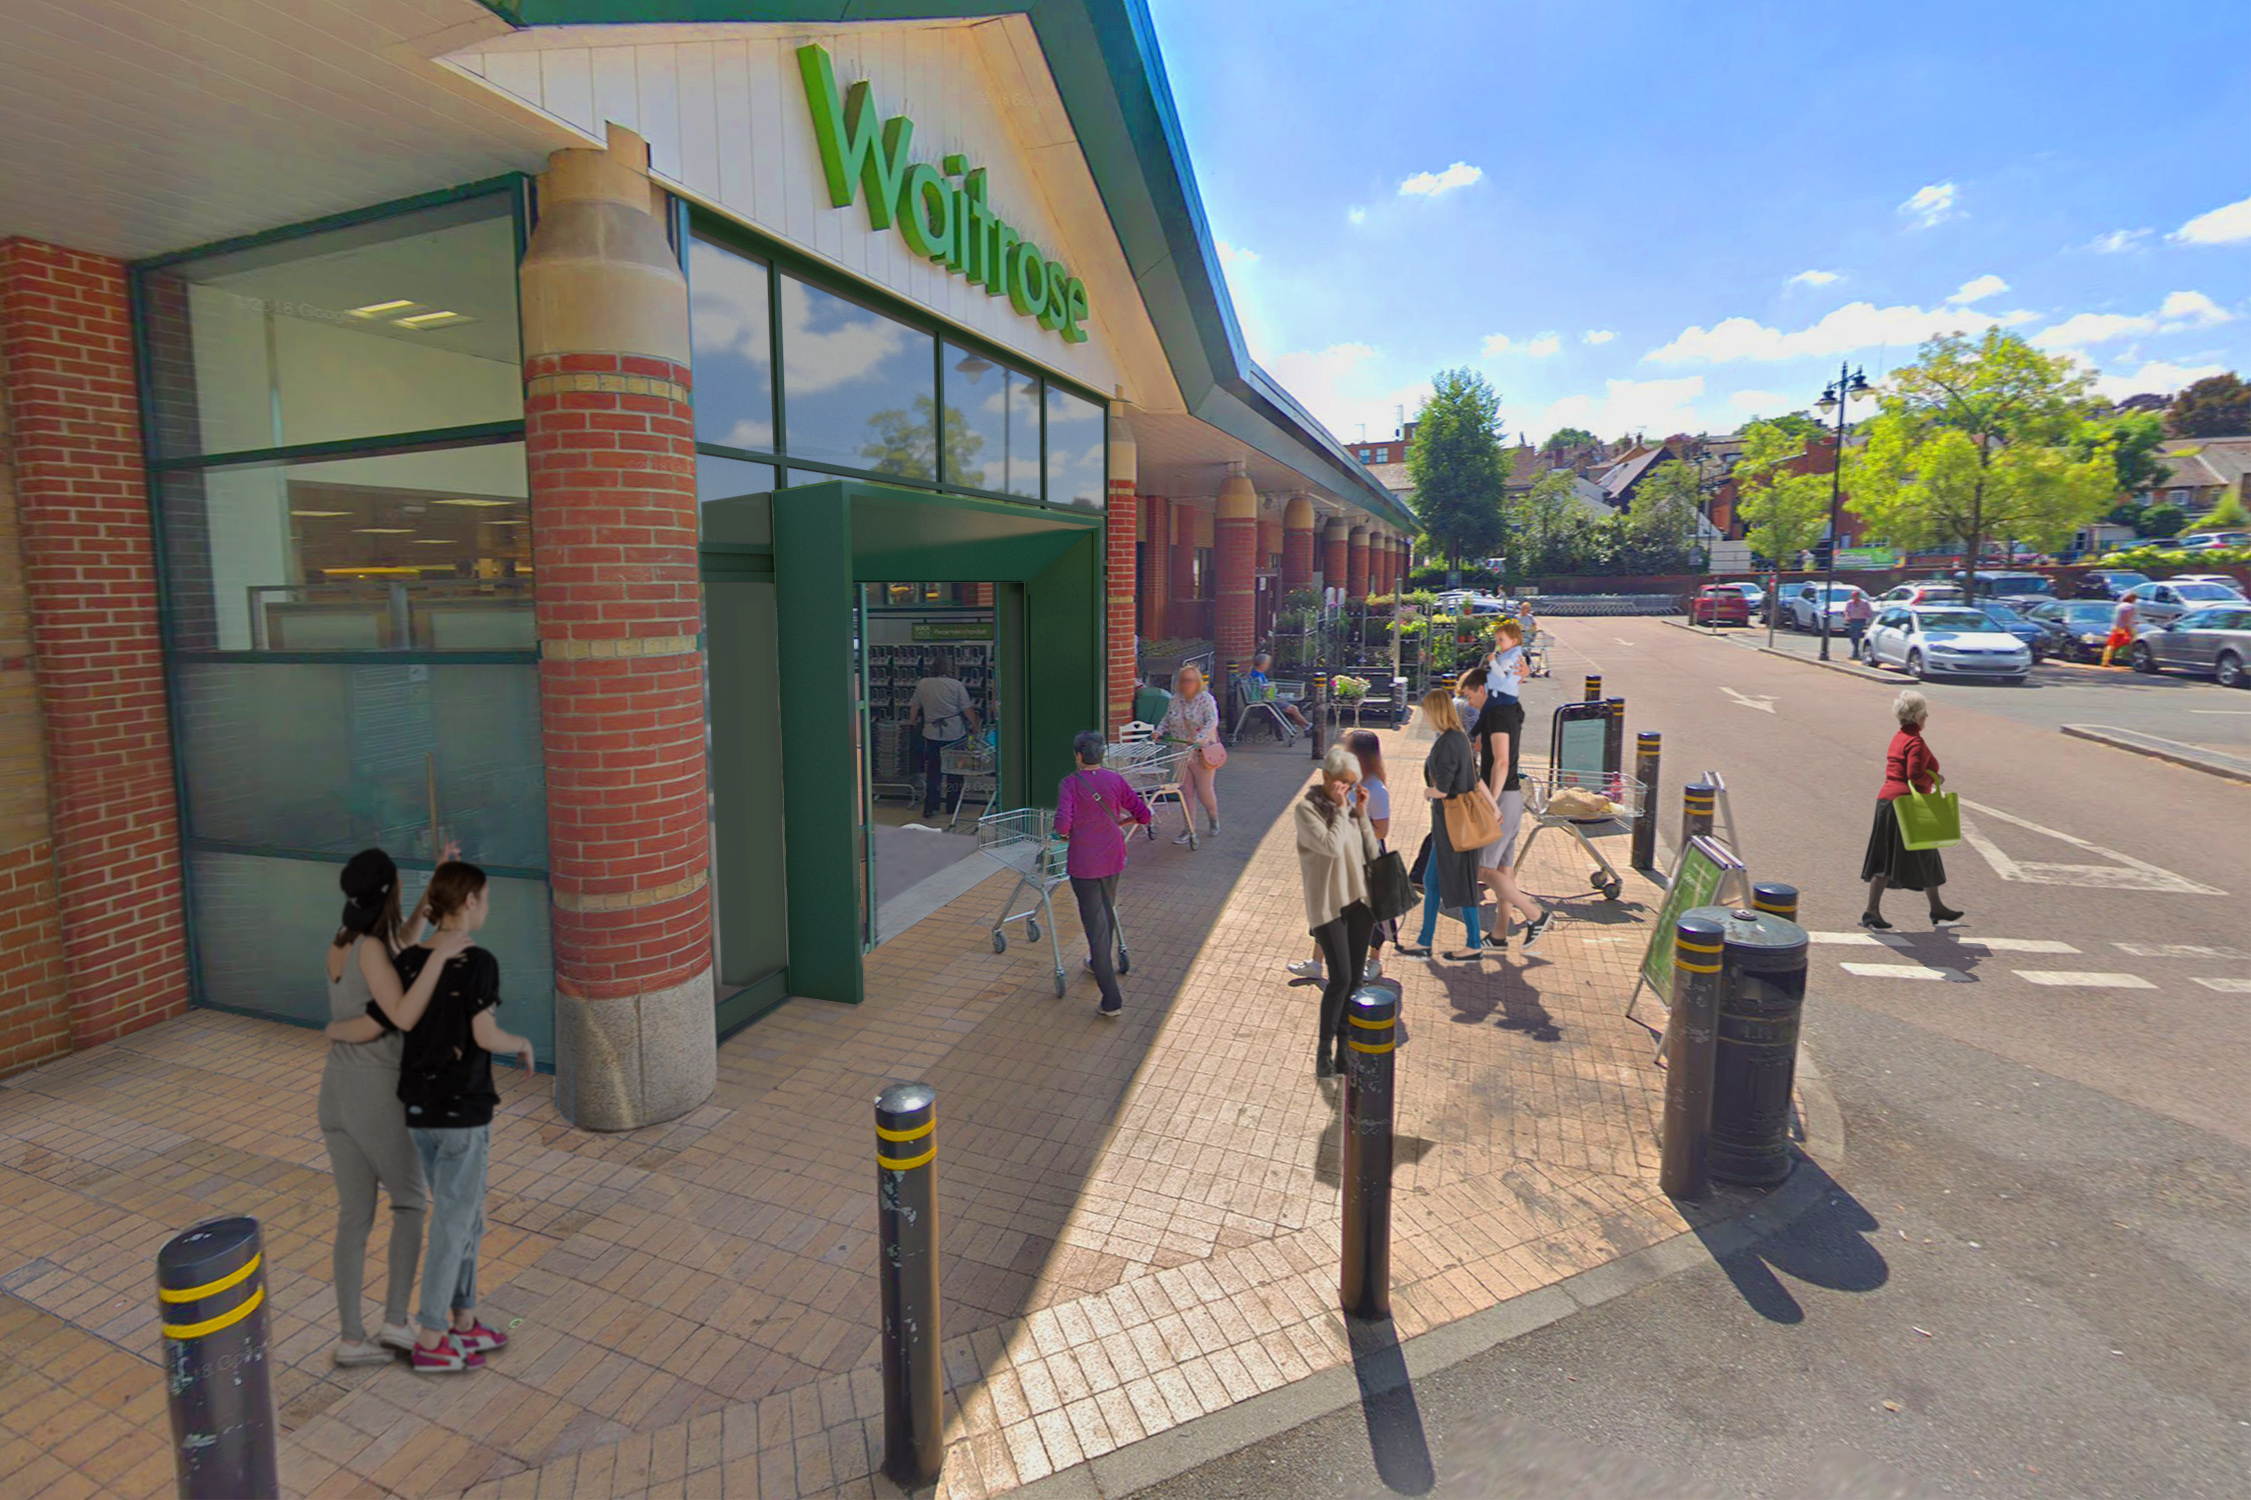 And finally… Waitrose to introduce energy-saving ‘invisible’ doors